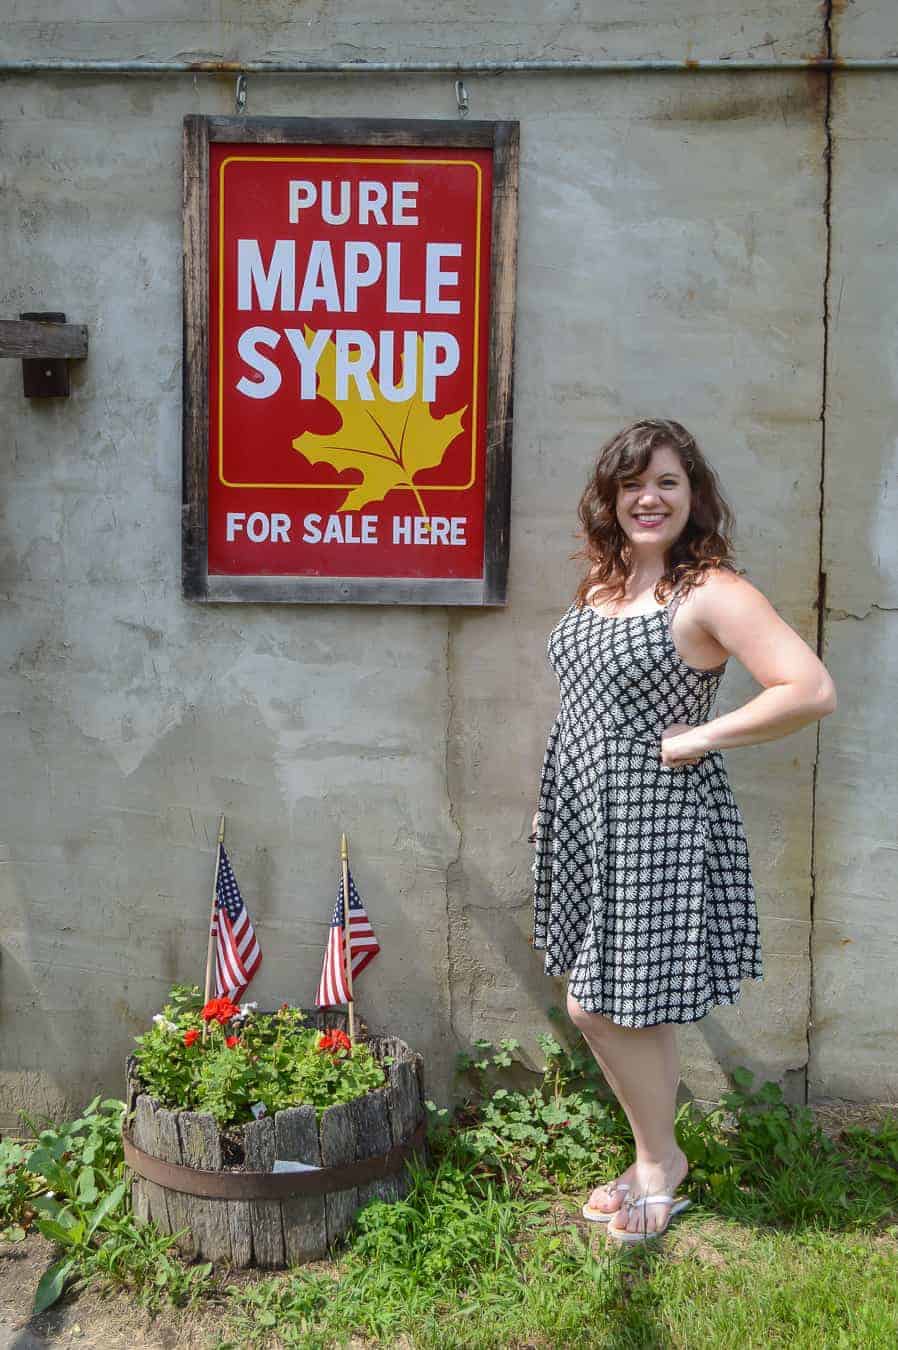 amy standing next to a sign that says pure maple syrup for sale here, she is wearing a blue dress and smiling, summertime in vermont